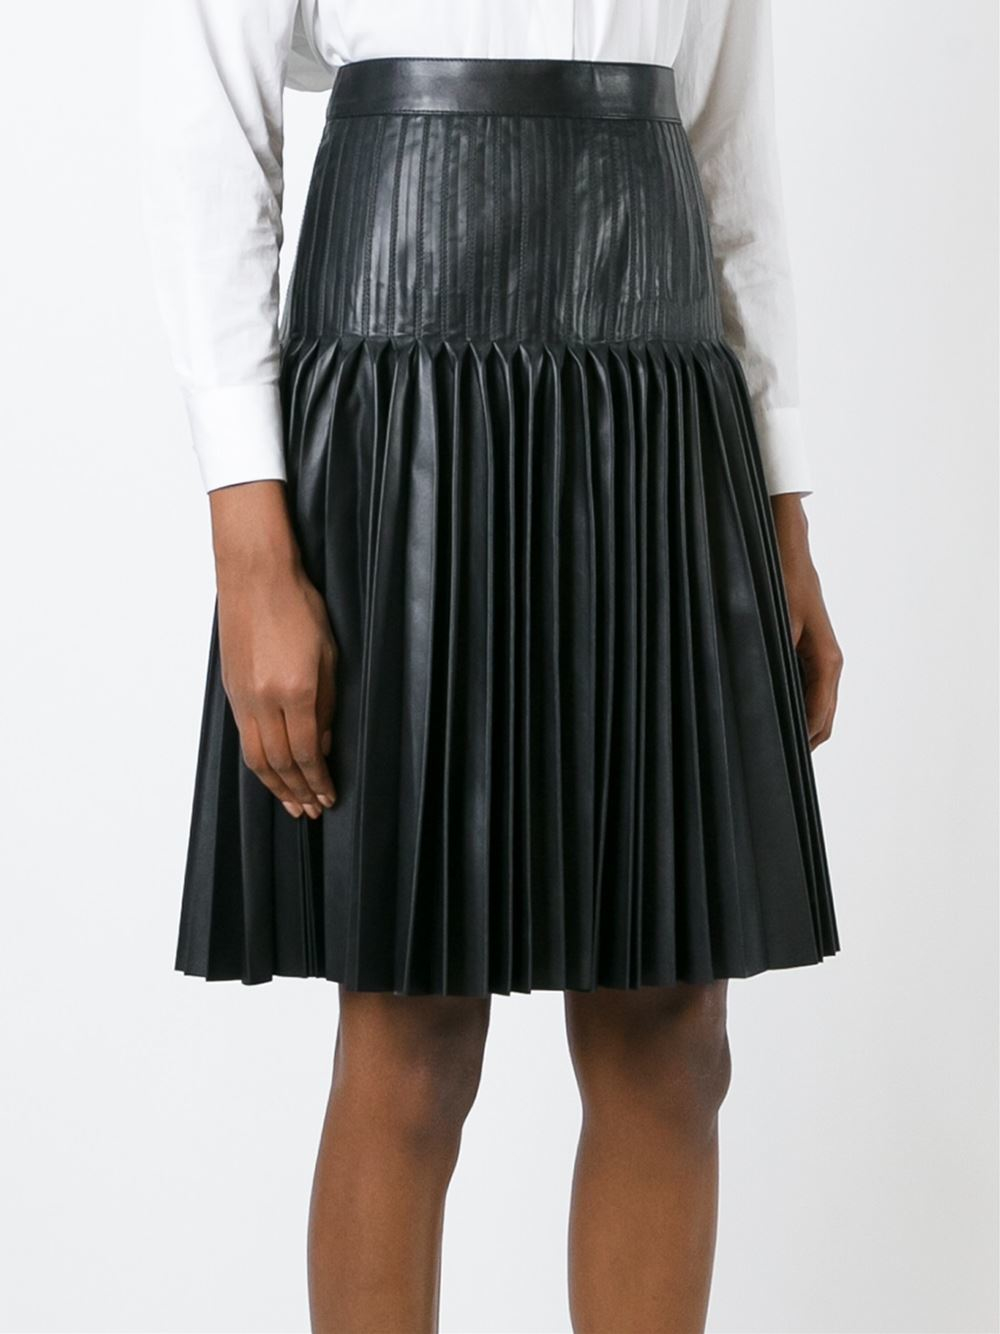 Givenchy Pleated Leather Skirt in Black | Lyst